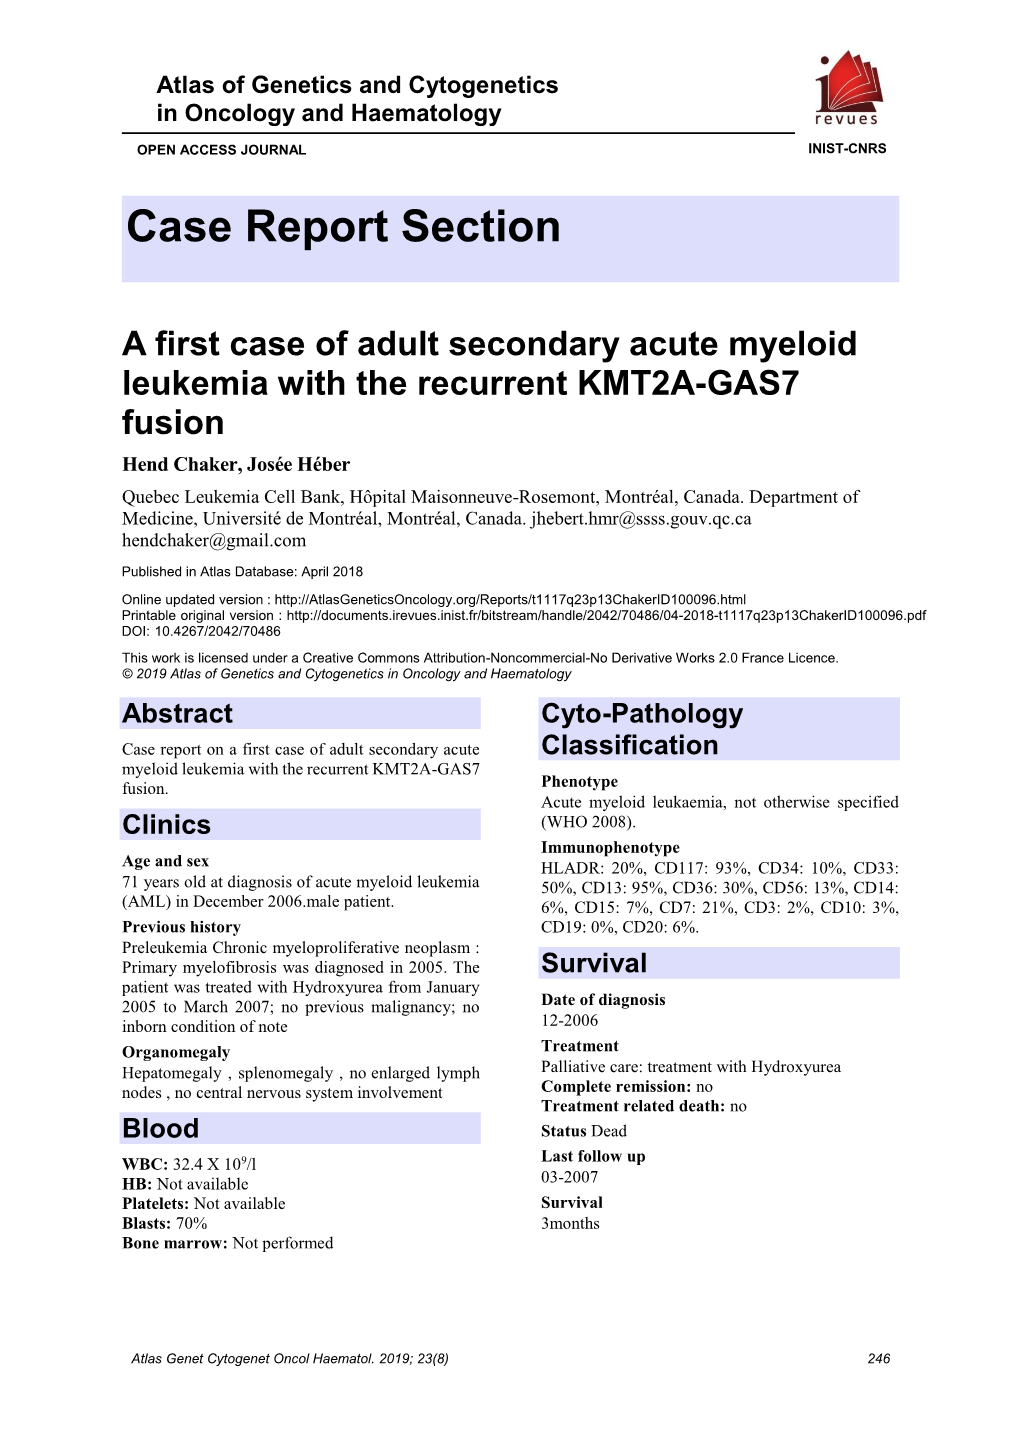 A First Case of Adult Secondary Acute Myeloid Leukemia with the Recurrent KMT2A-GAS7 Fusion